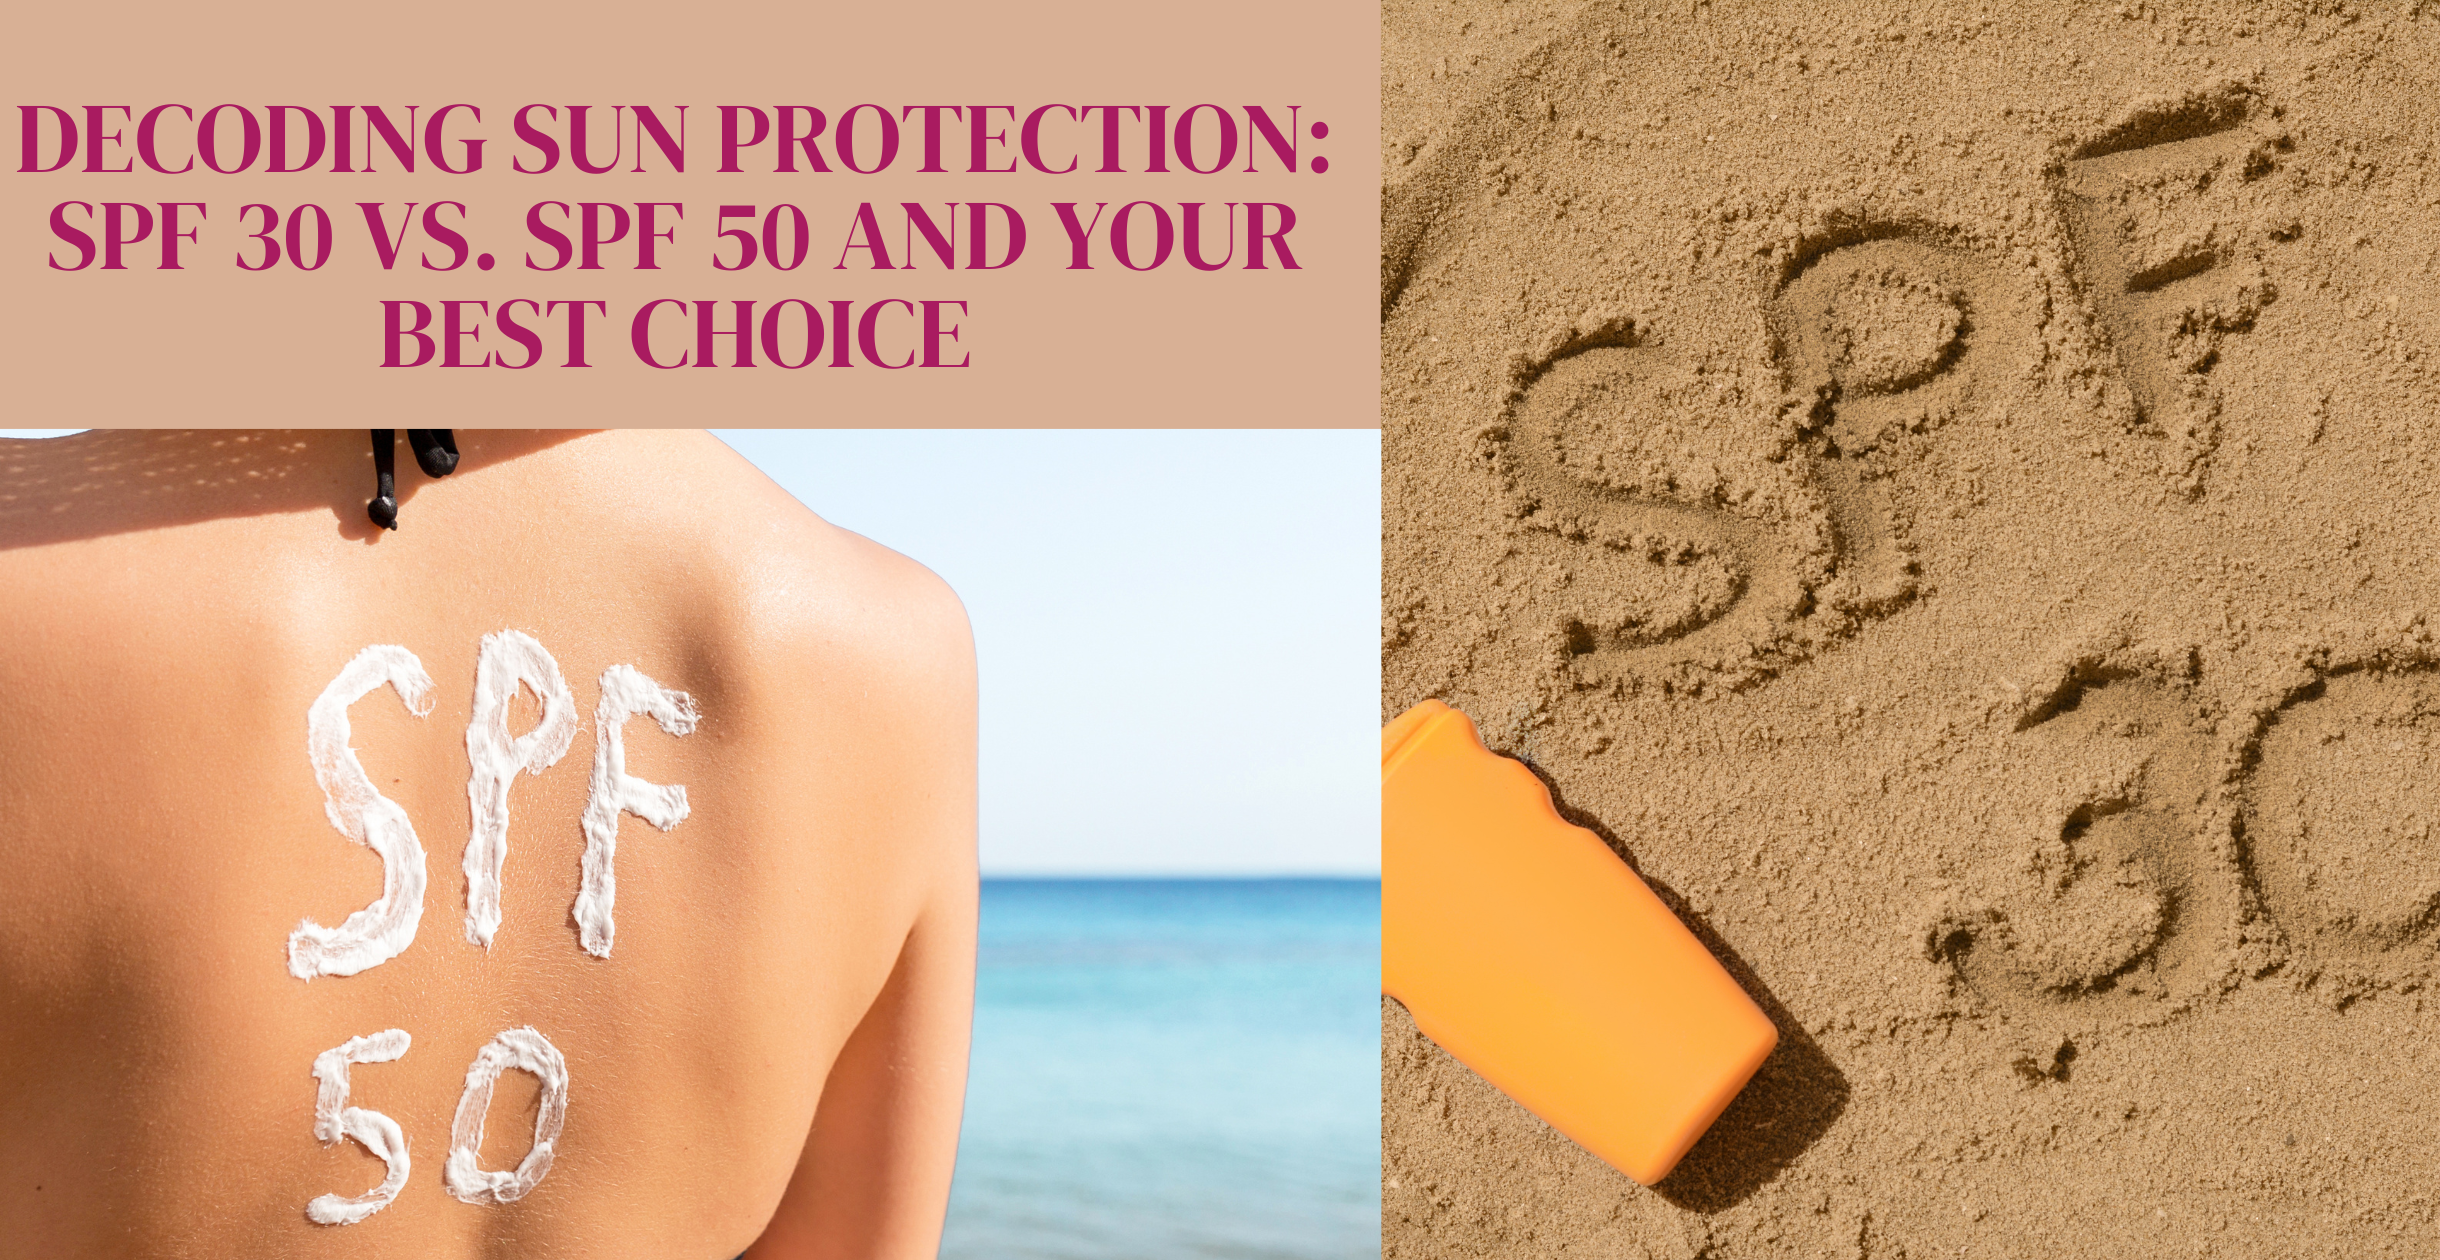 Decoding Sun Protection: SPF 30 vs. SPF 50 and Your Best Choice